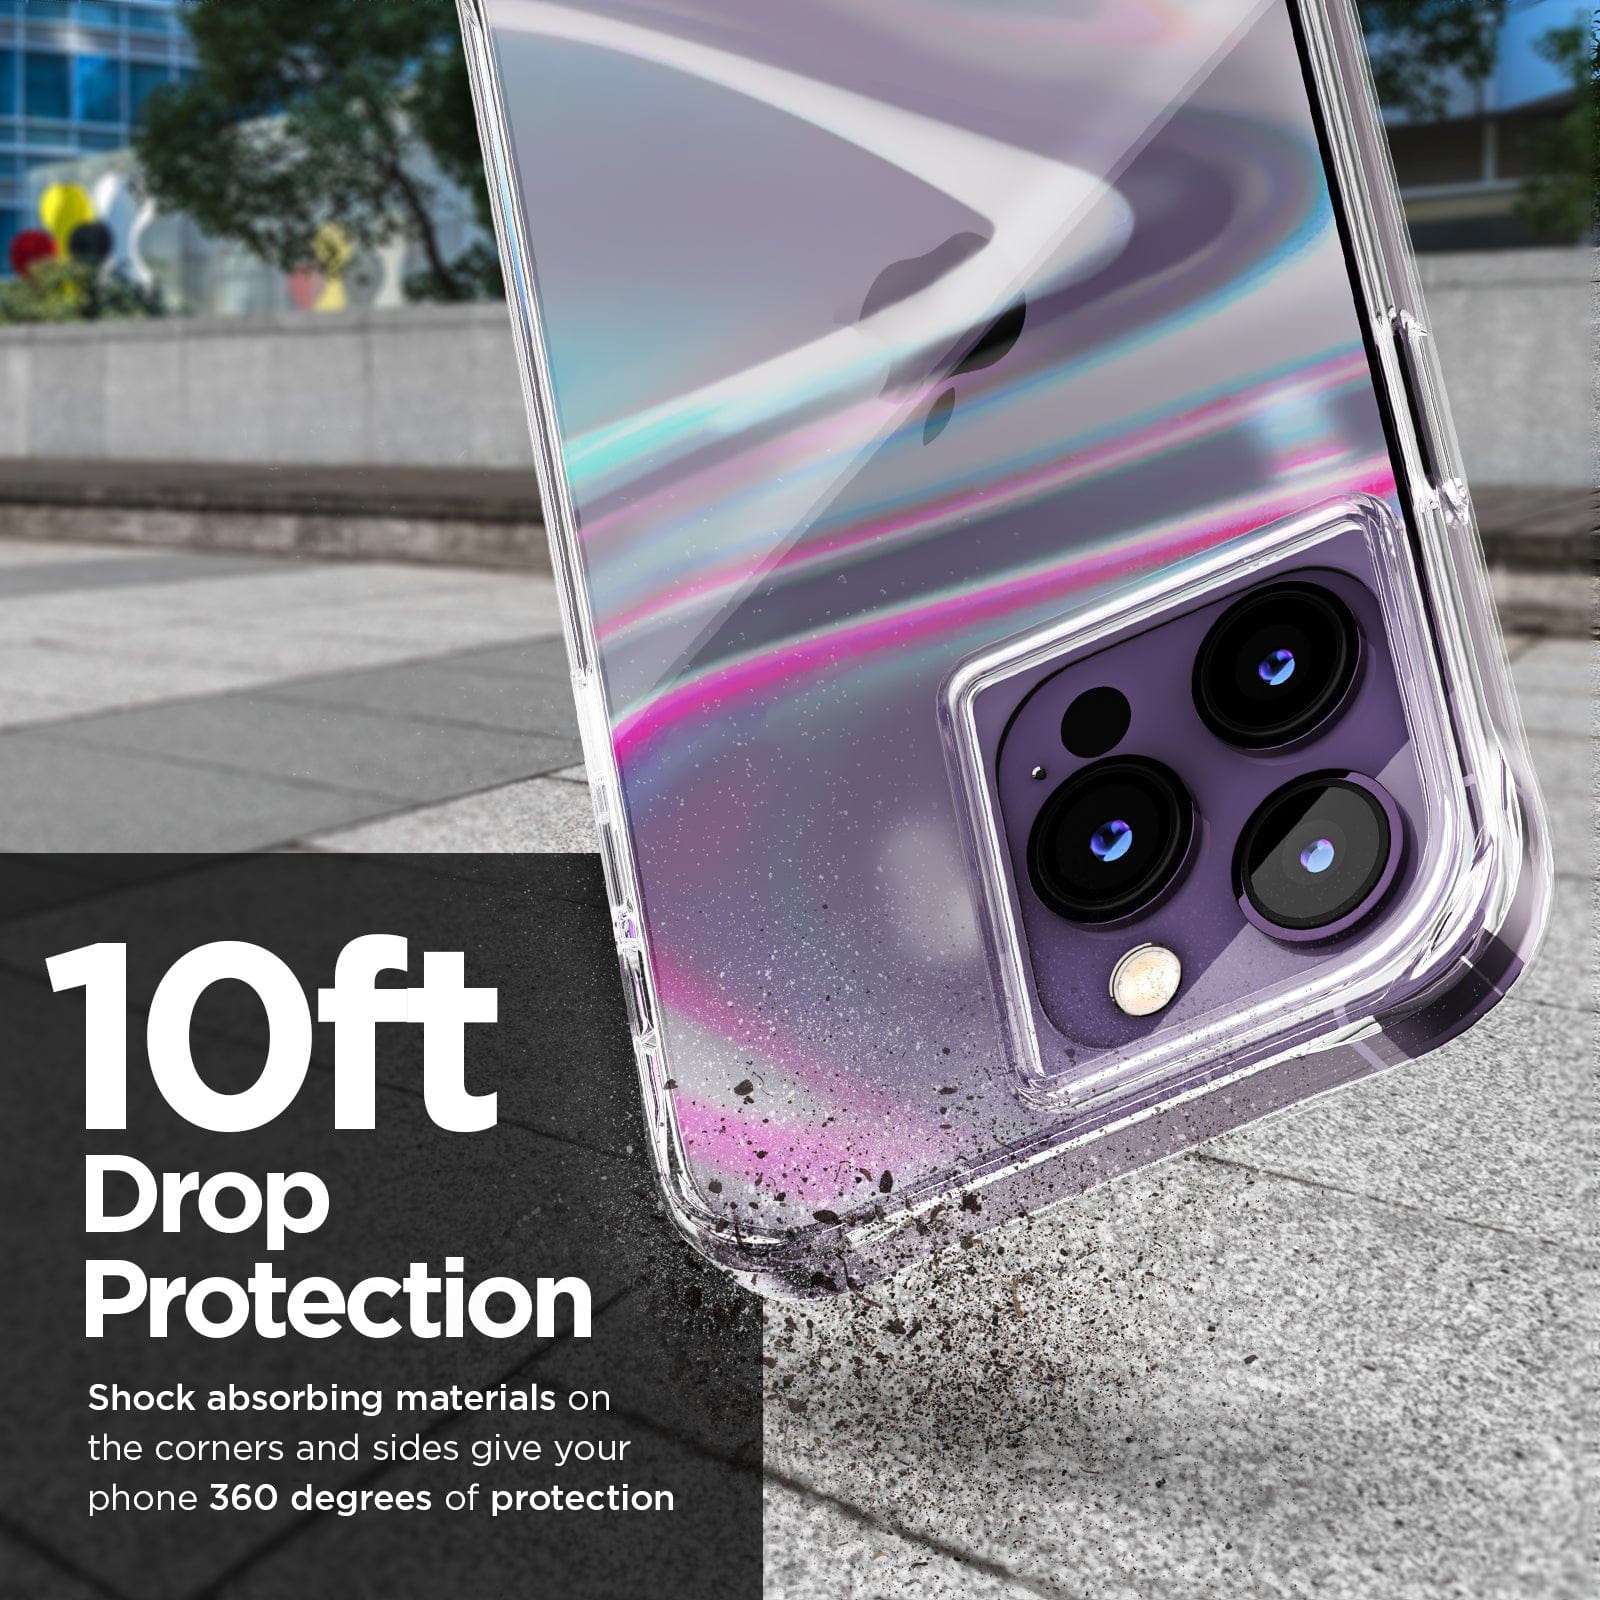 10FT DROP PROTECTION. SHOCK ABSORBING MATERIALS ON THE CORNERS AND SIDES GIVE YOUR PHONE 360 DEGREES OF PROTECTION. 